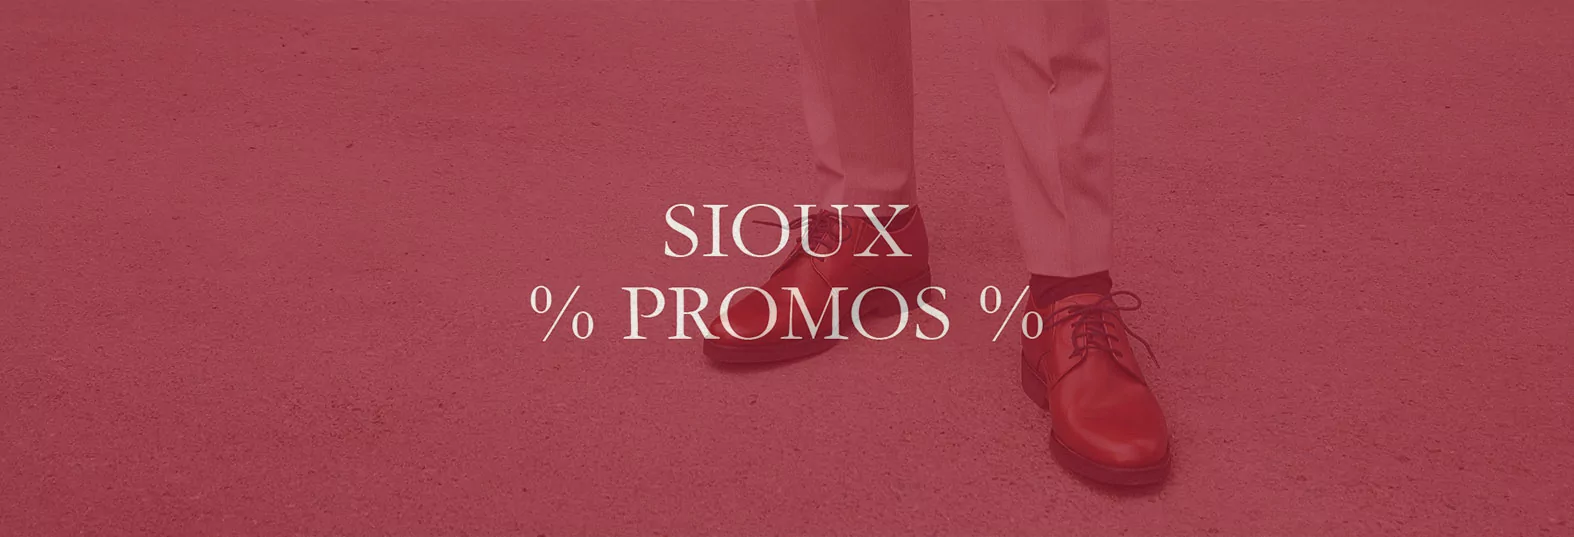 Sioux homme sale